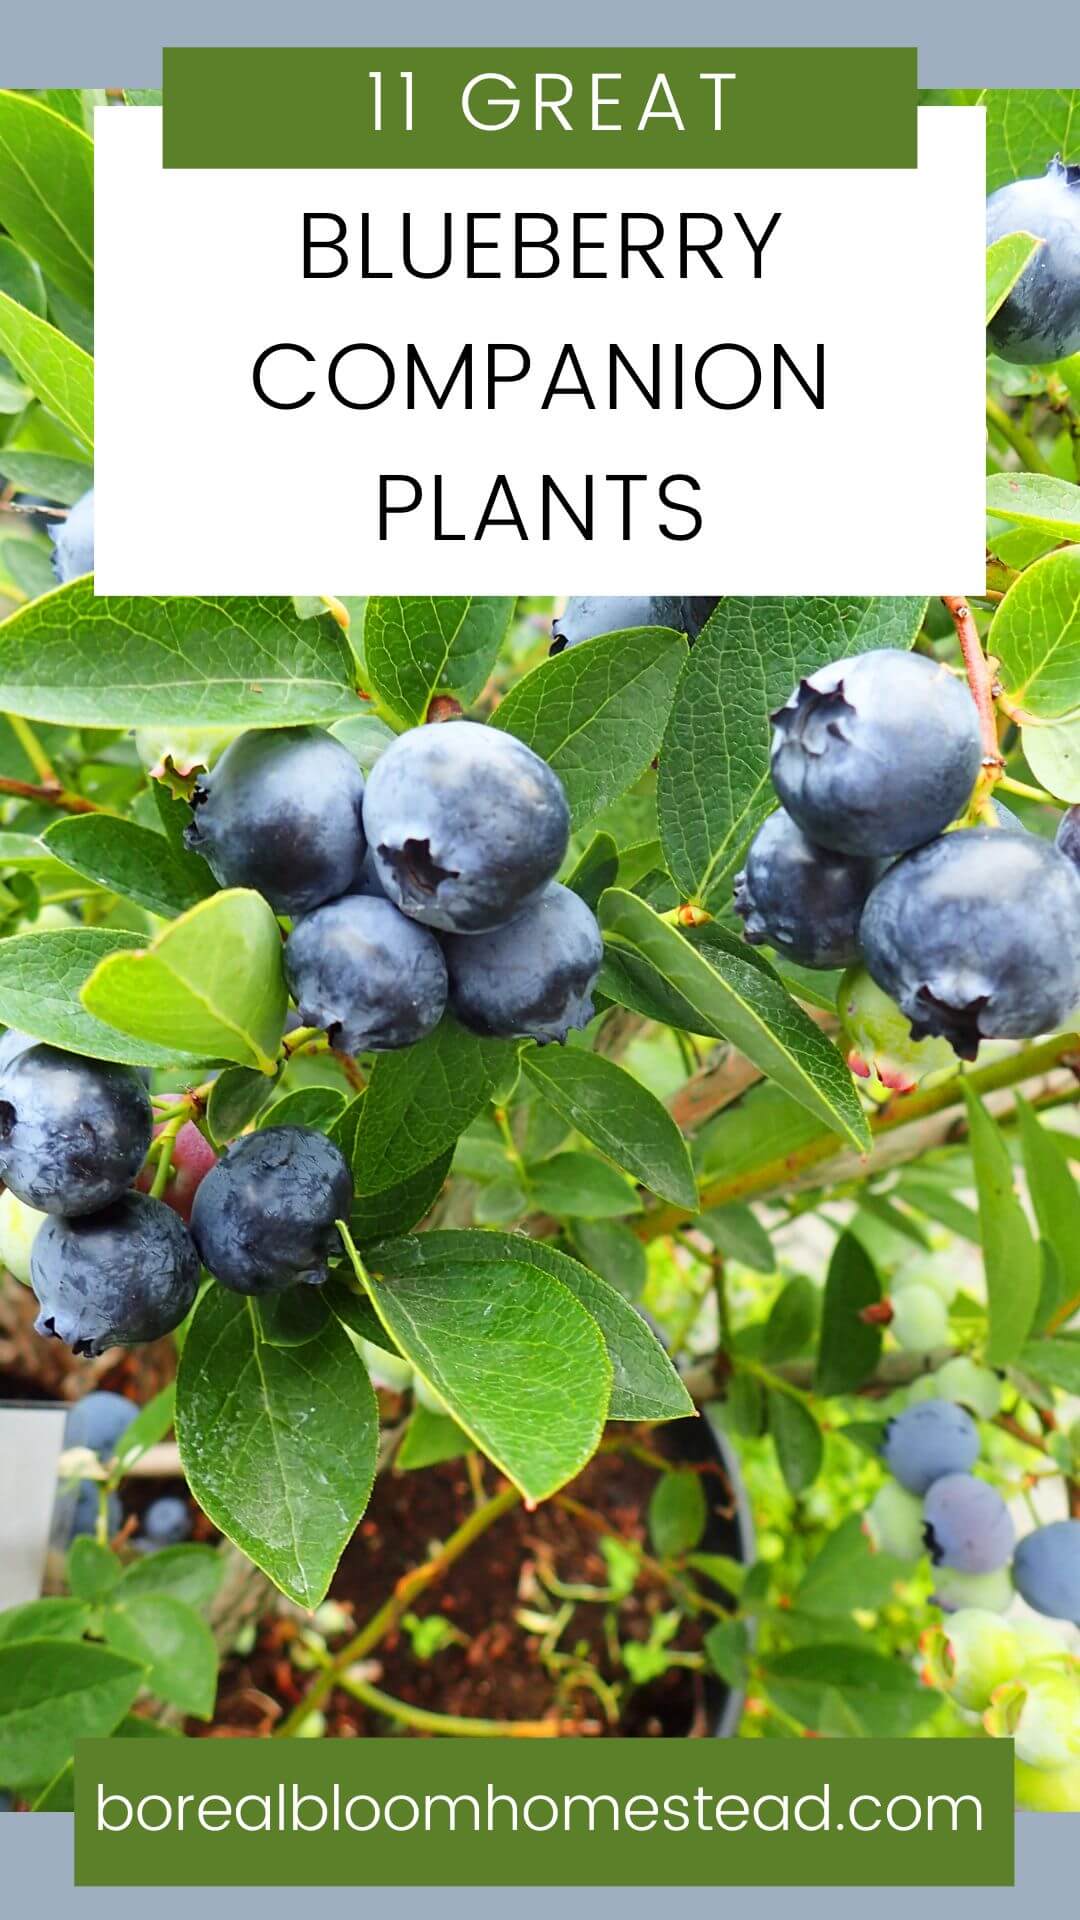 Blueberry bush with ripe berries and text overlay: 11 great blueberry companion plants.